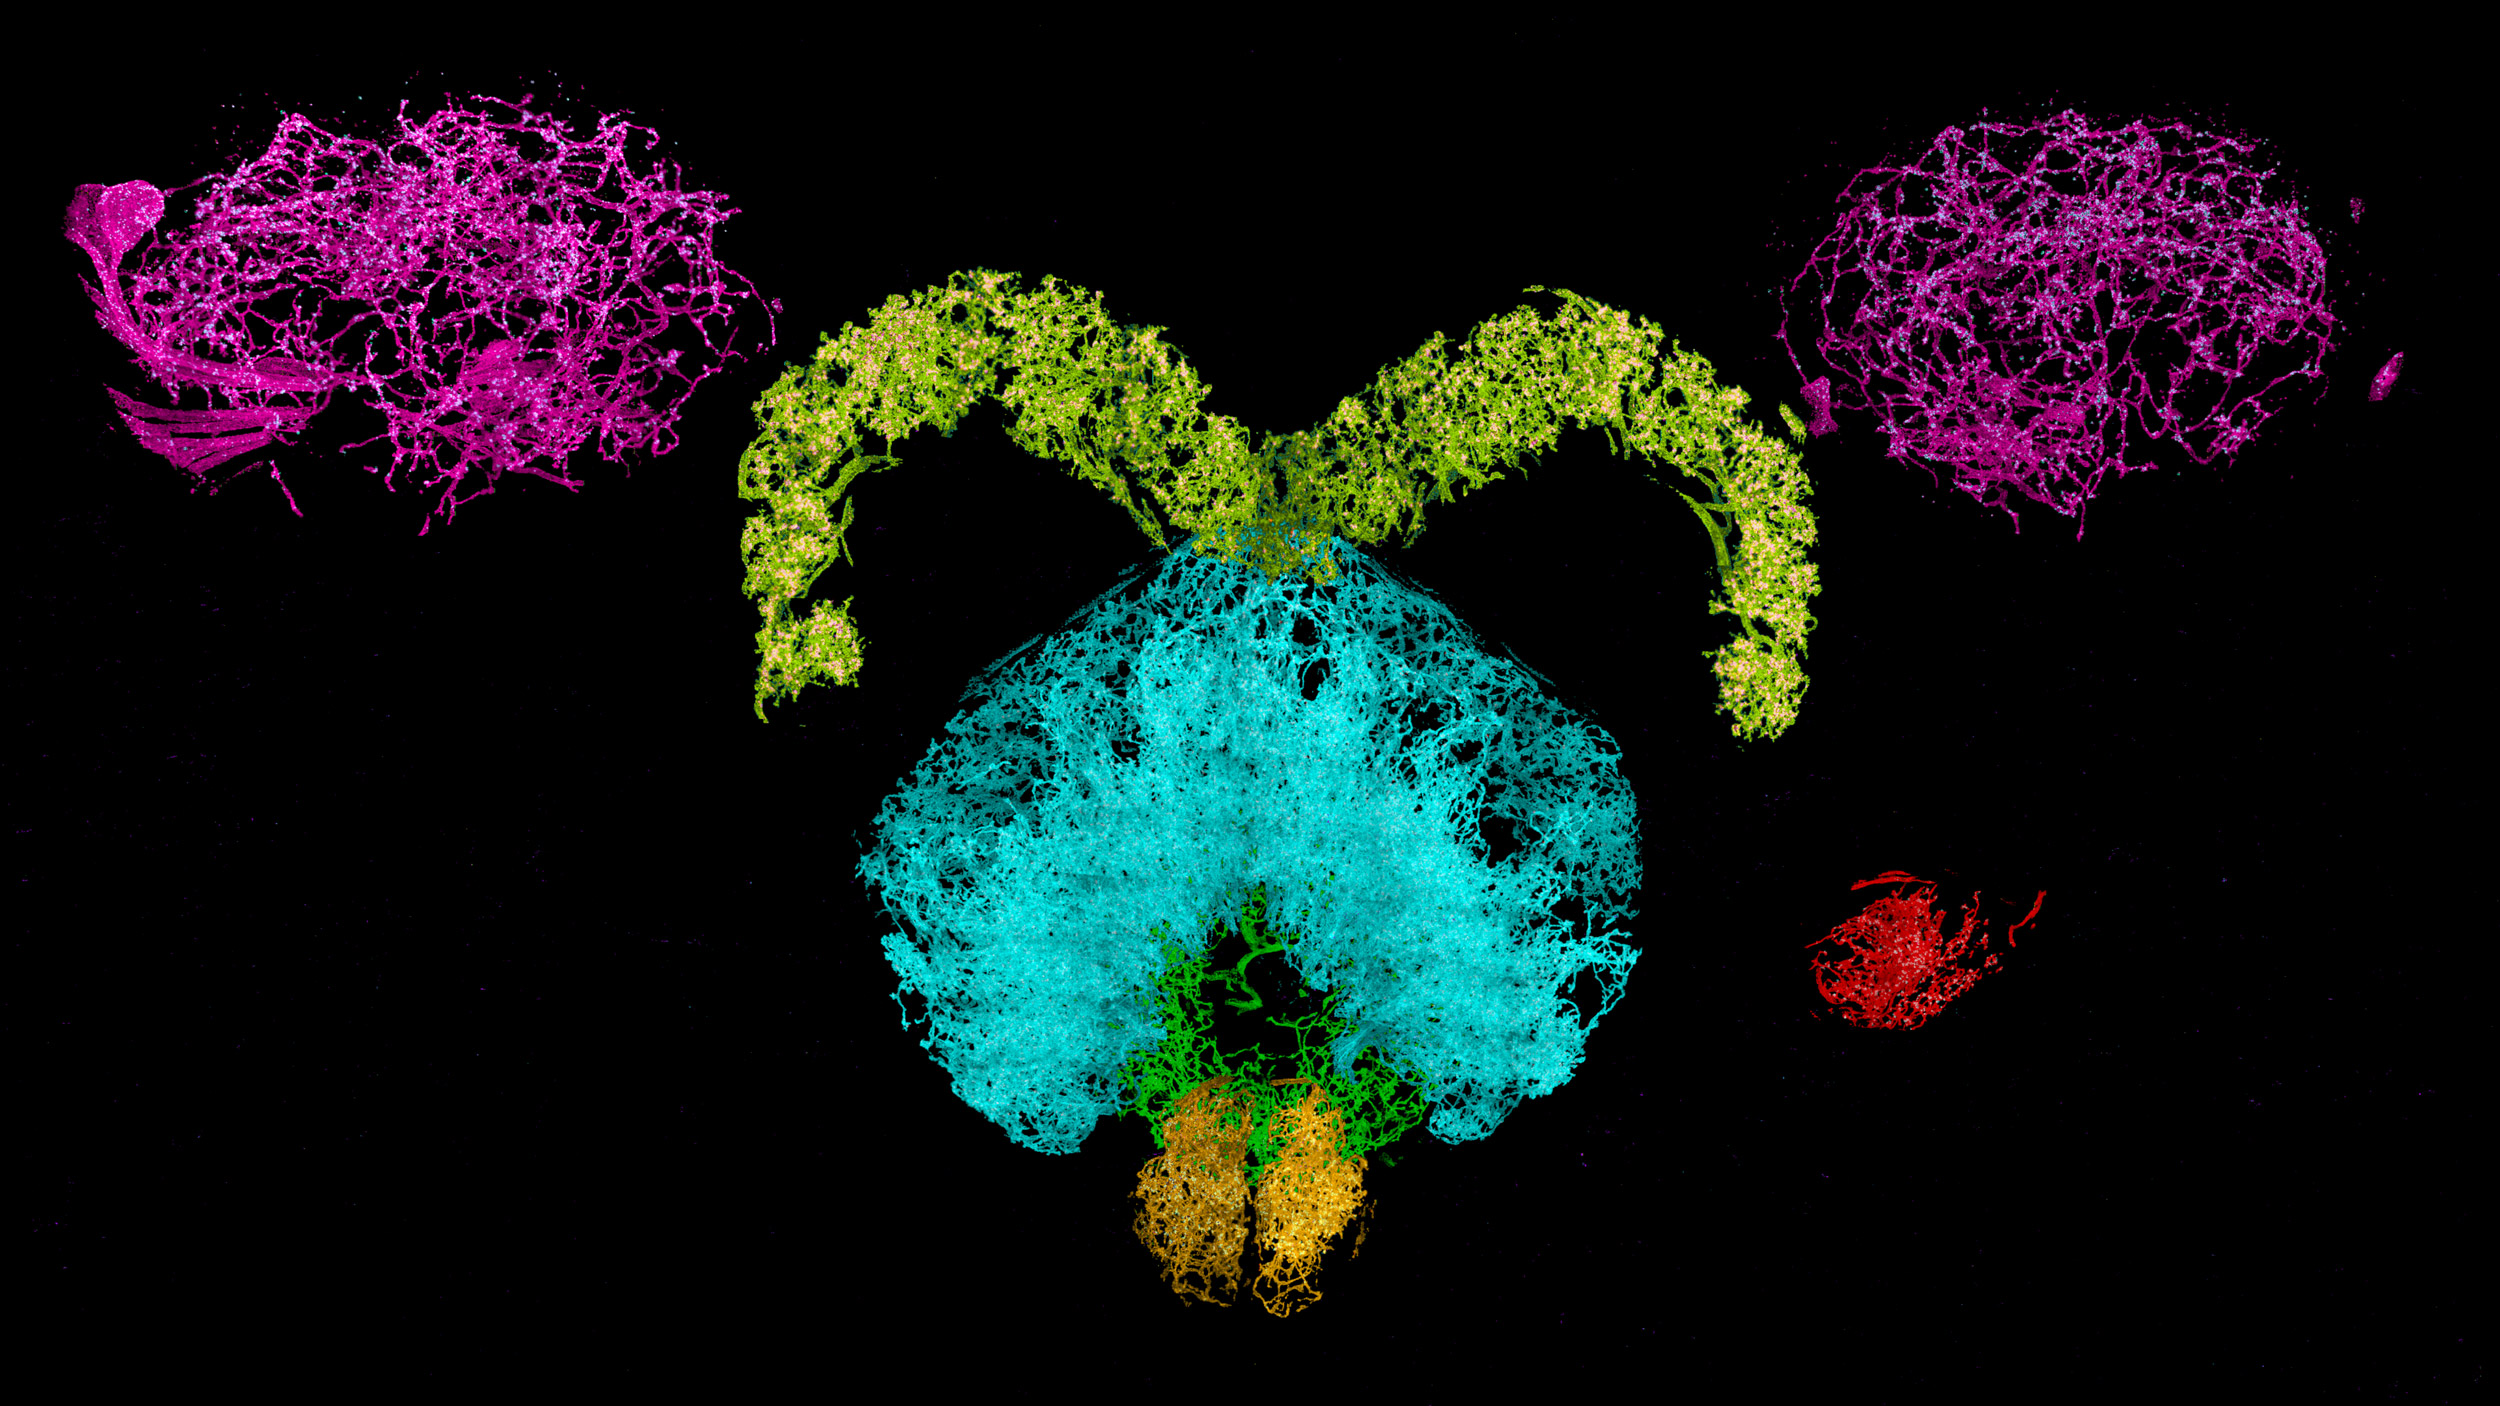 Dopaminergic neurons and associated synaptic proteins in the central complex of the fruit fly brain, color coded by different domains